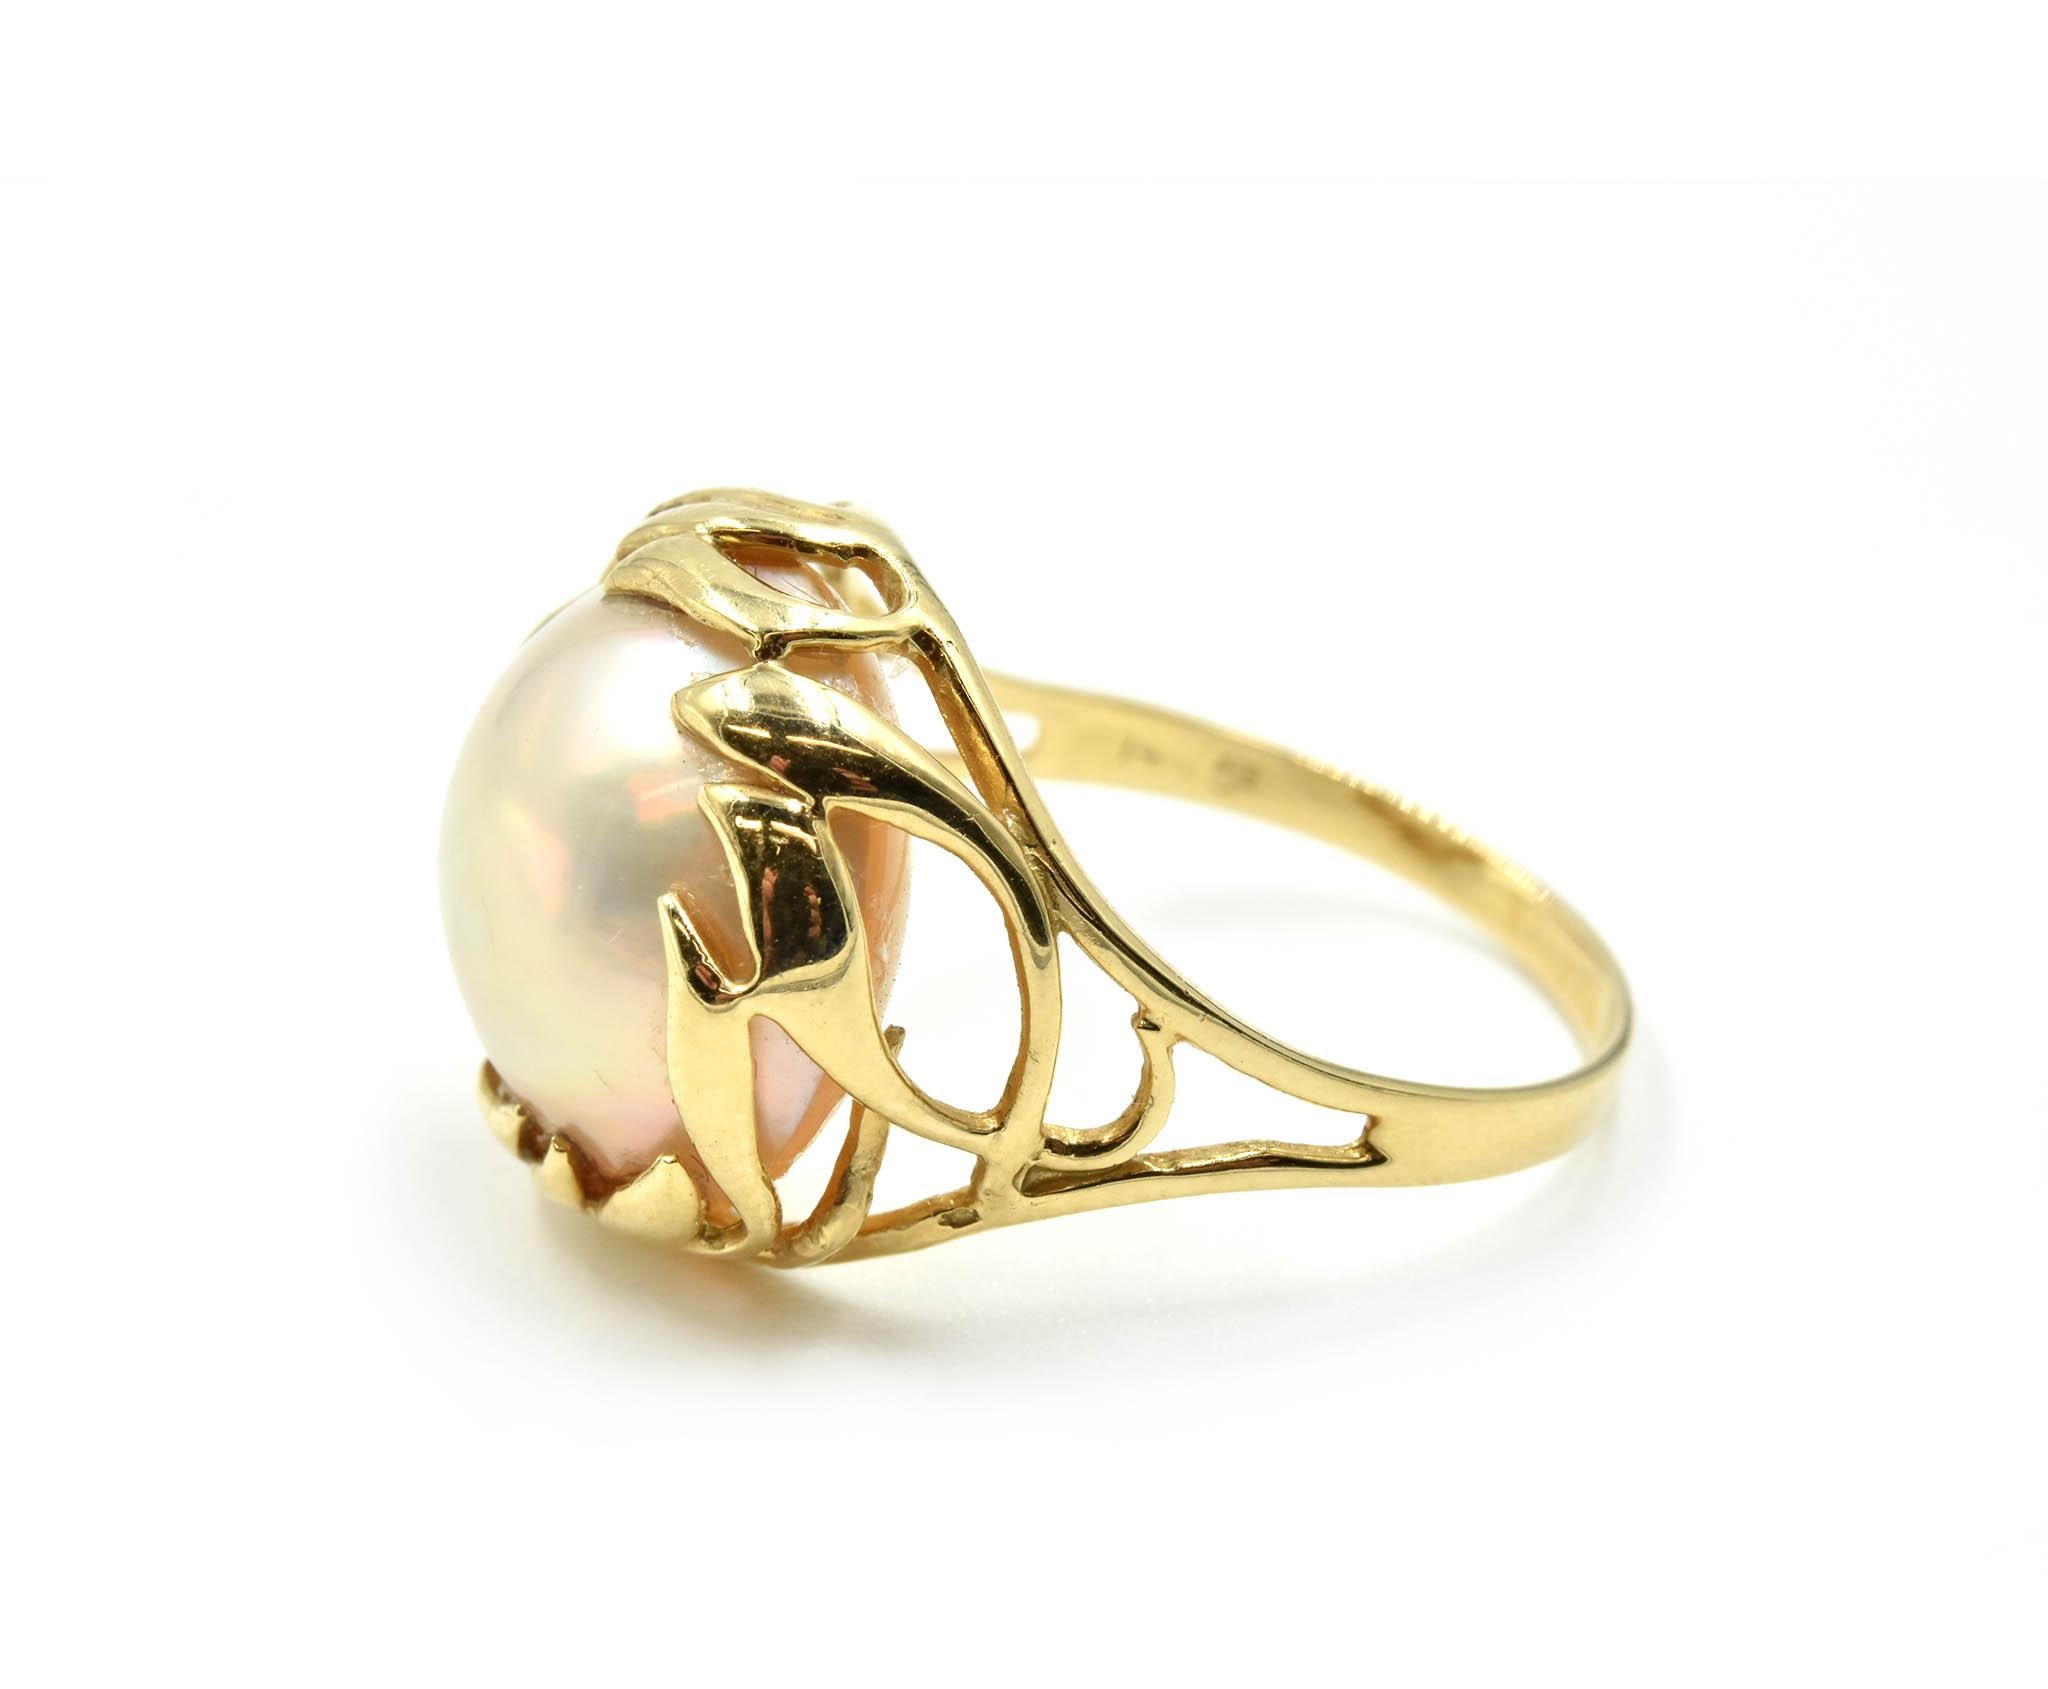 Designer: custom design
Material: 14k yellow gold
Dimensions: ring top is a 1/2-inch in diameter
Ring Size: 6 1/2 (please allow two extra shipping days for sizing requests) 
Weight: 3.70 grams
